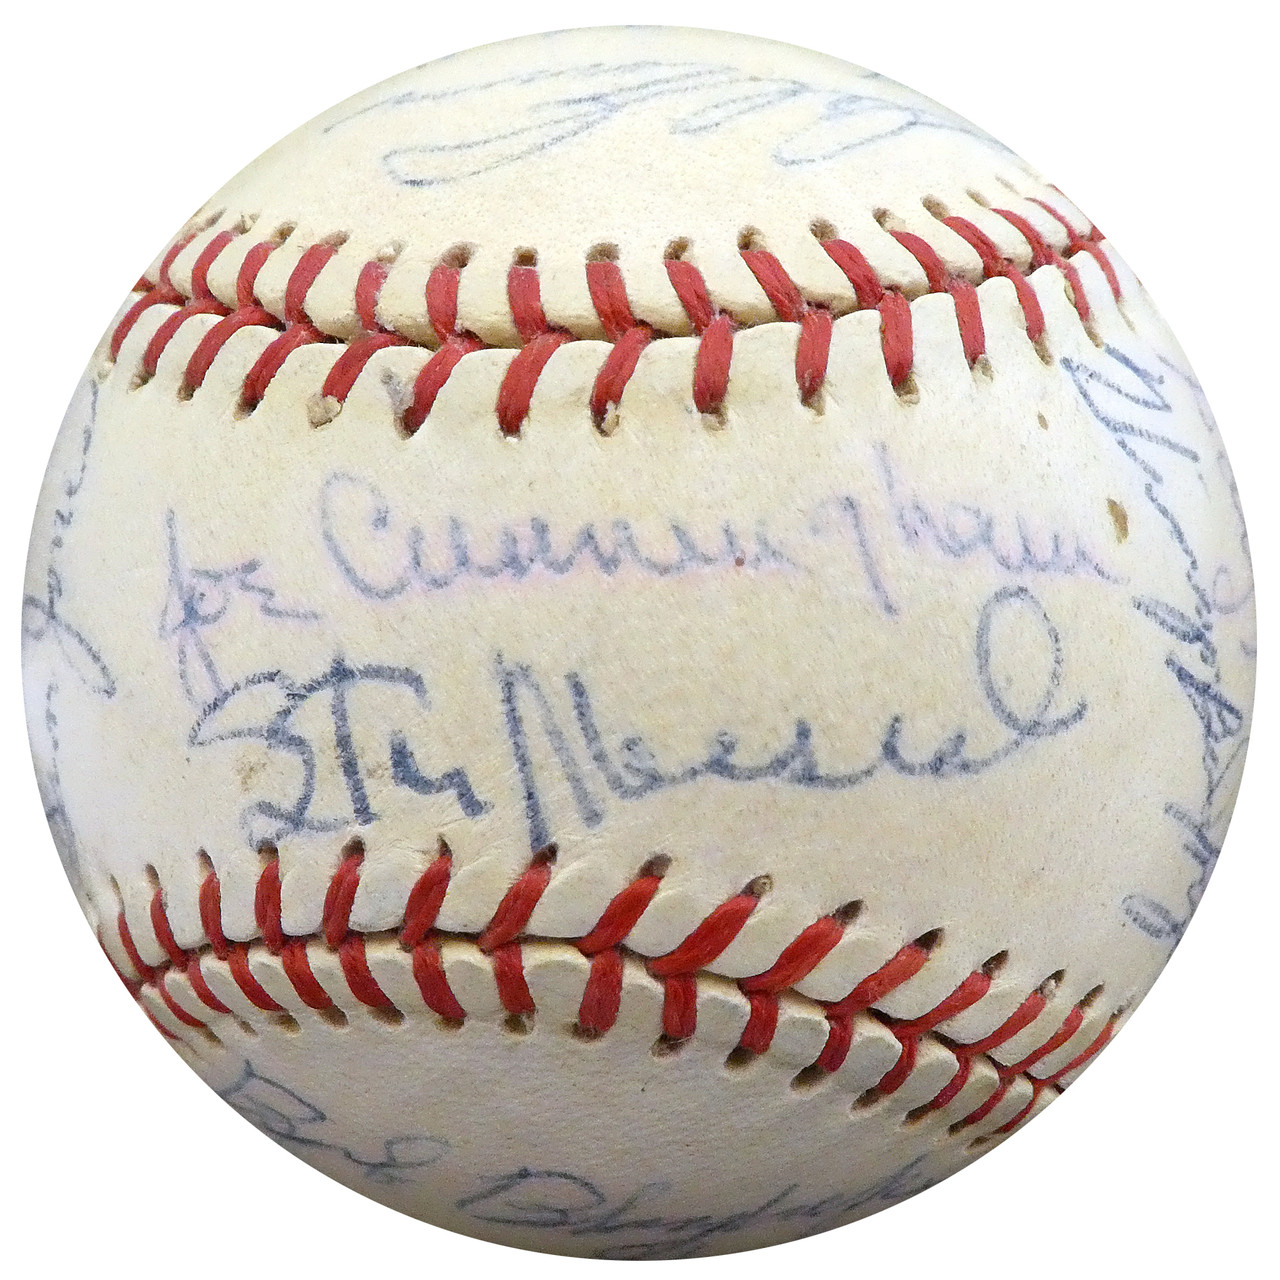 1957 St. Louis Cardinals Autographed Official Baseball With 30